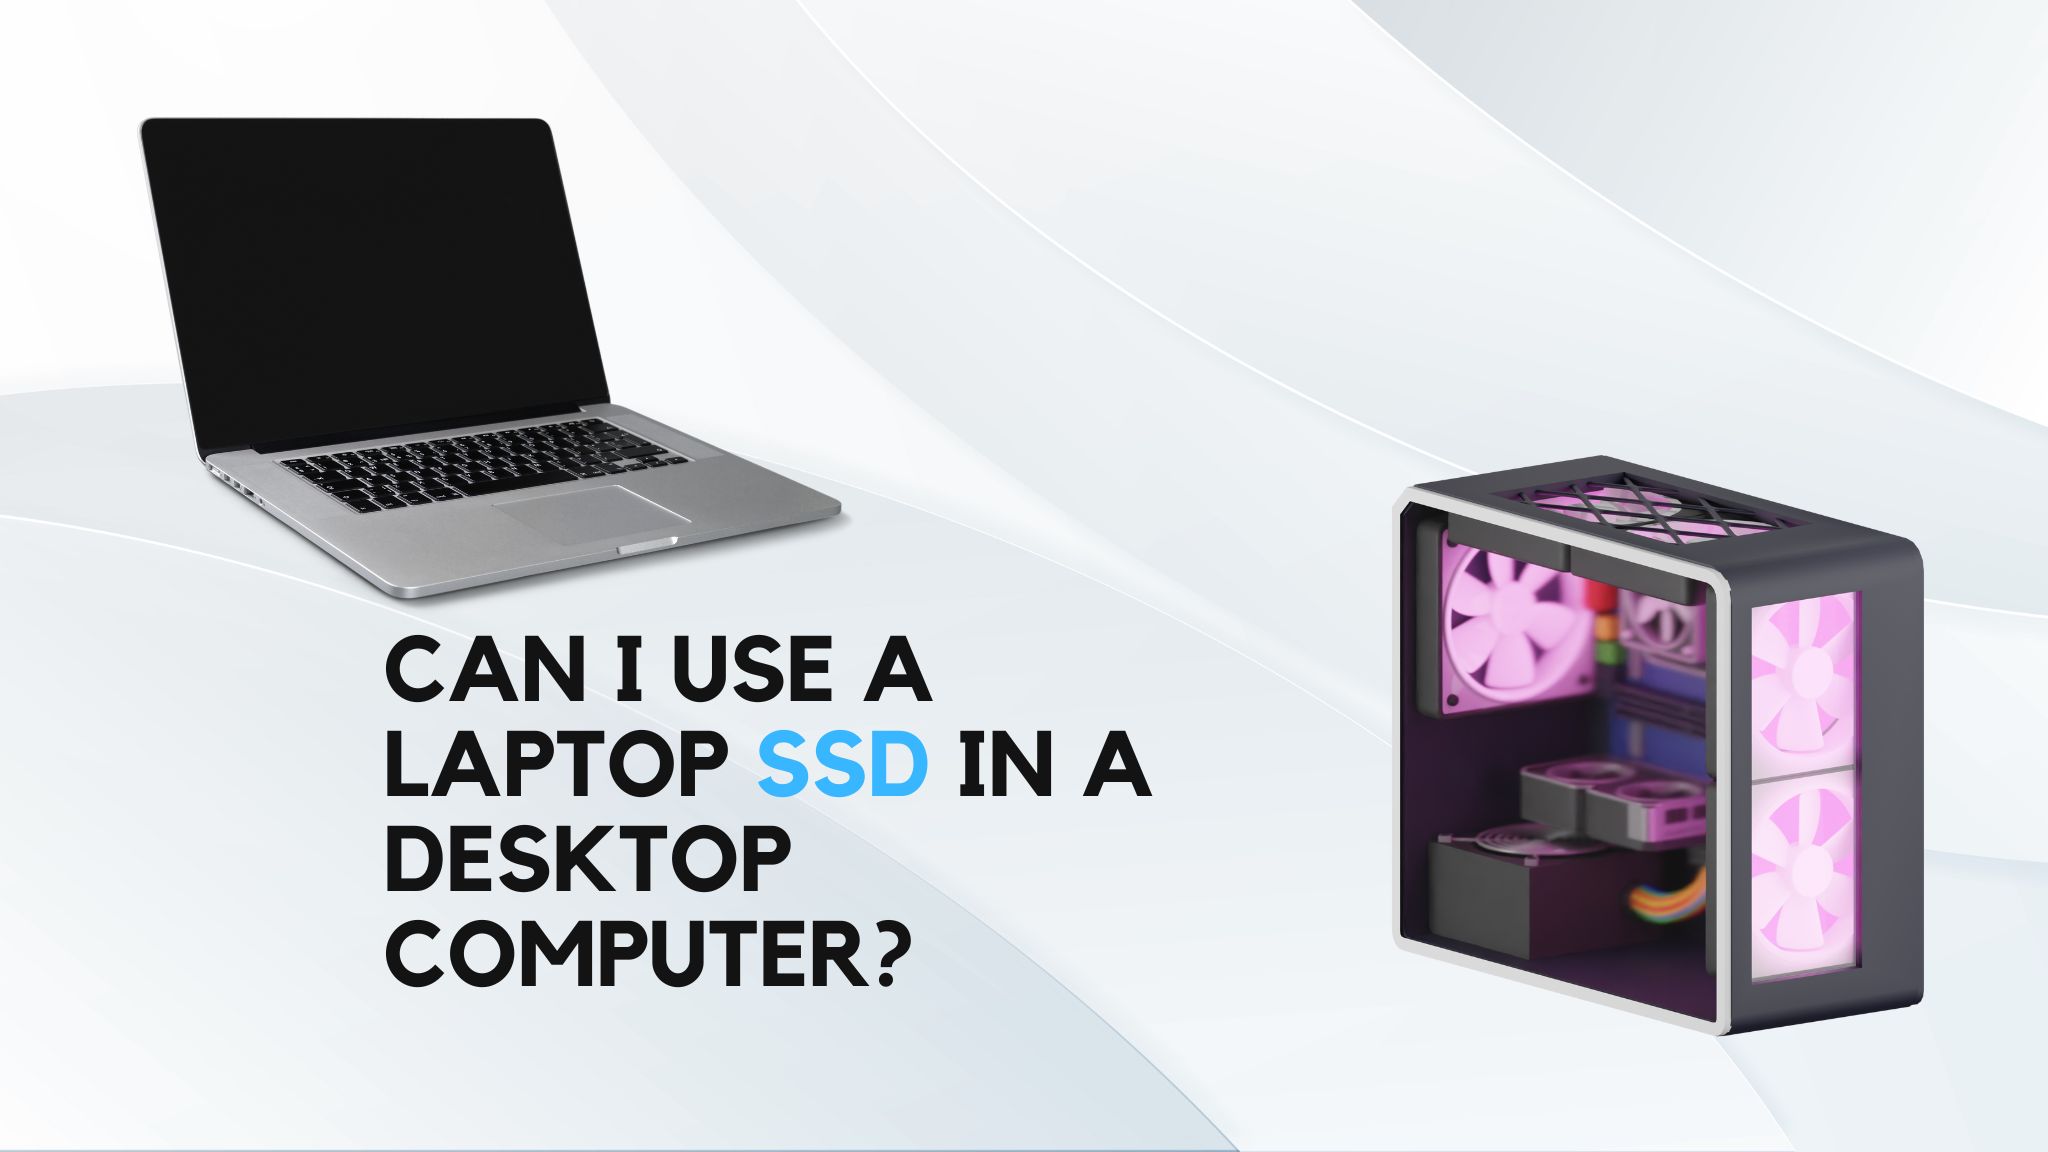 Can I use a laptop SSD in a desktop computer?